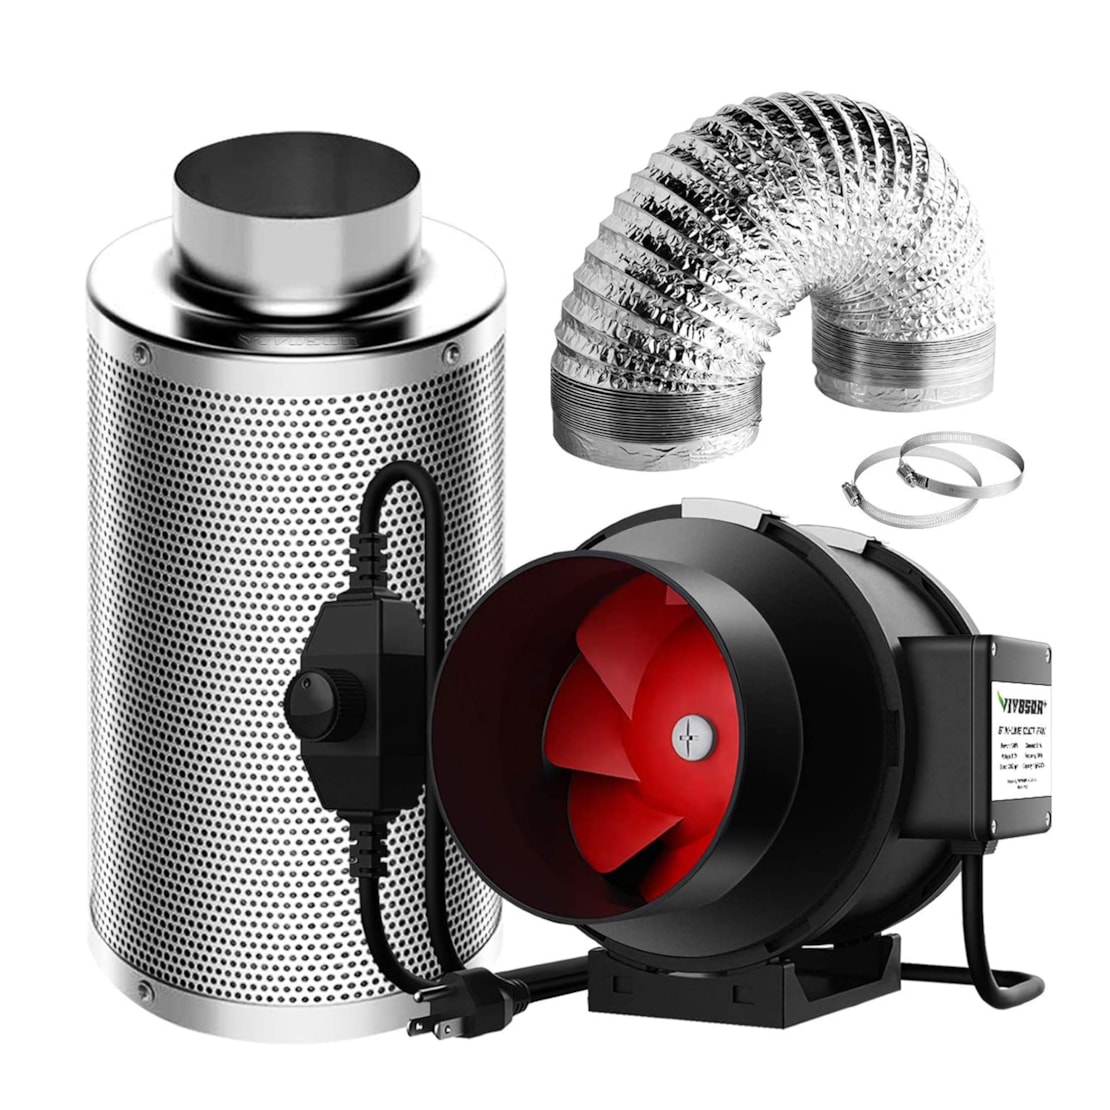 VIVOSUN 6-Inch 390 CFM Inline Duct Fan Kit with Carbon Filter and Ducting